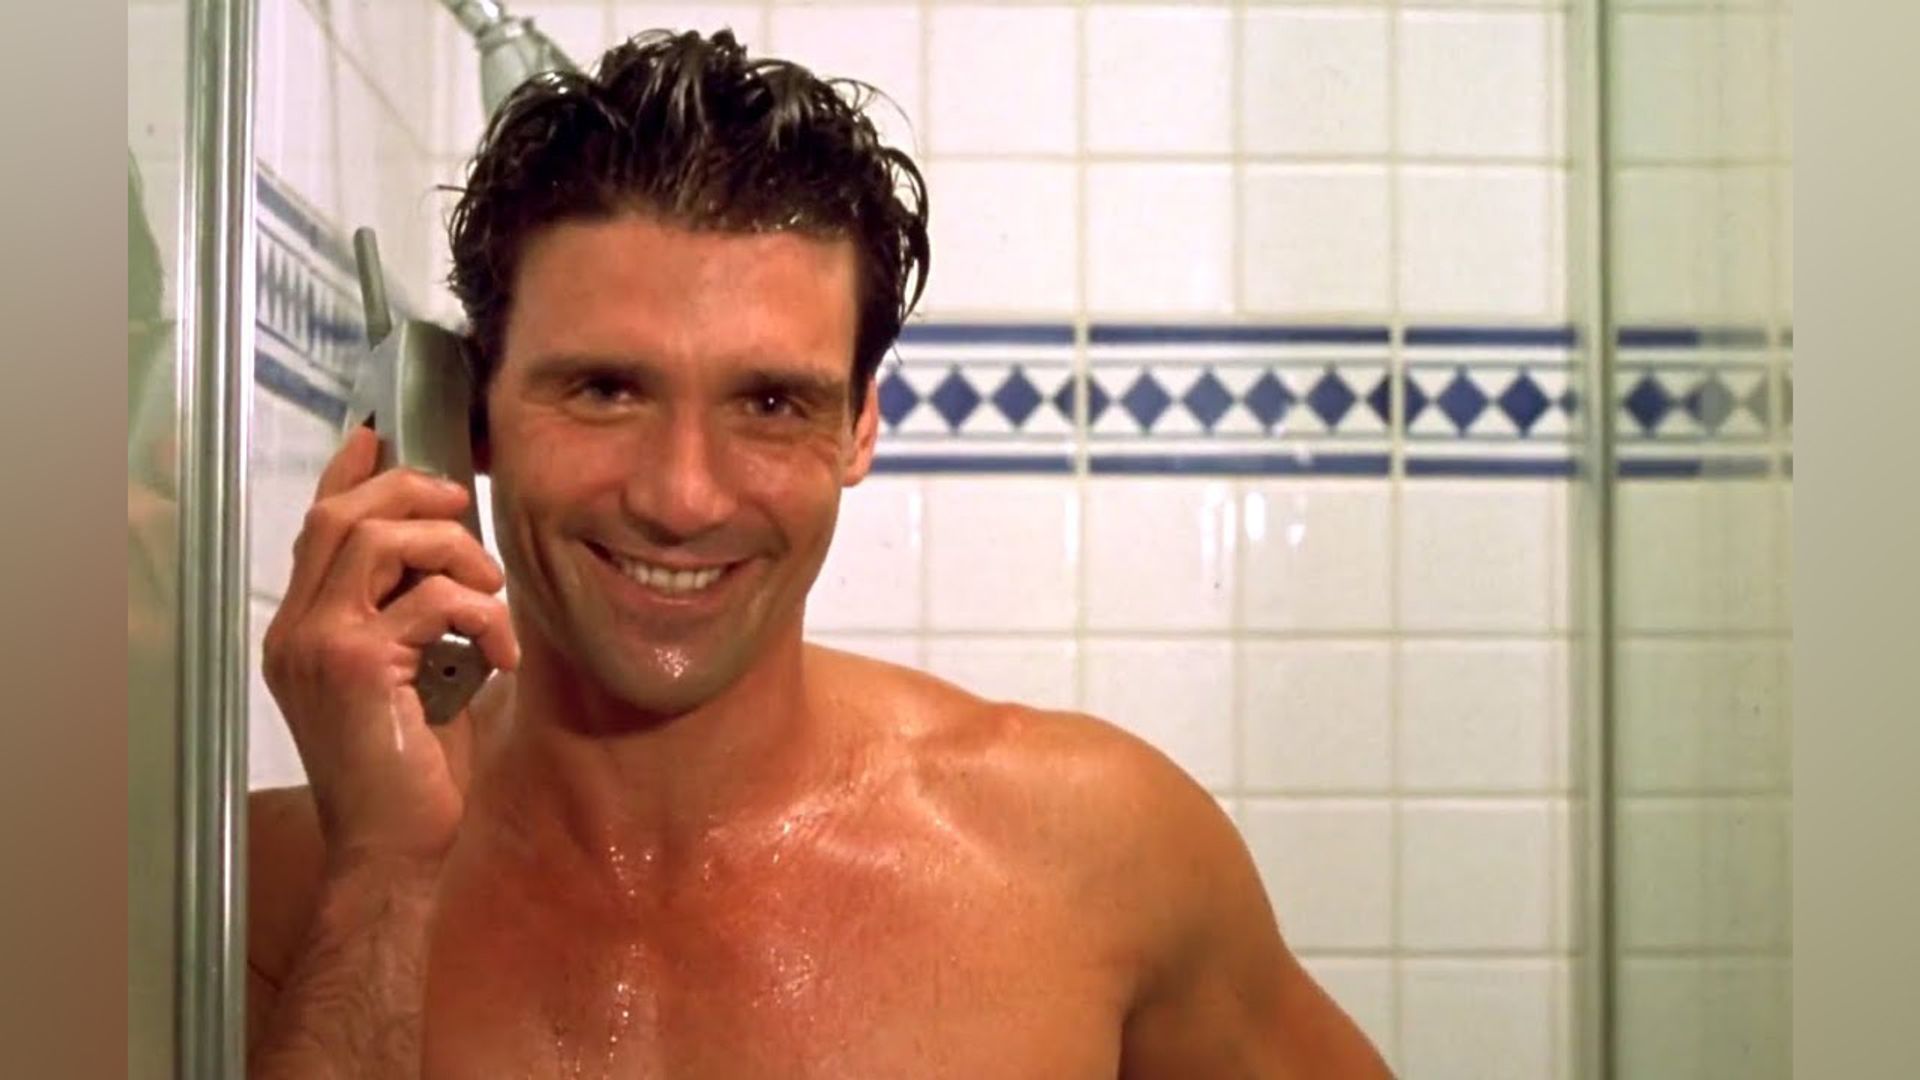 Frank Grillo in the movie 'The Sweetest Thing'